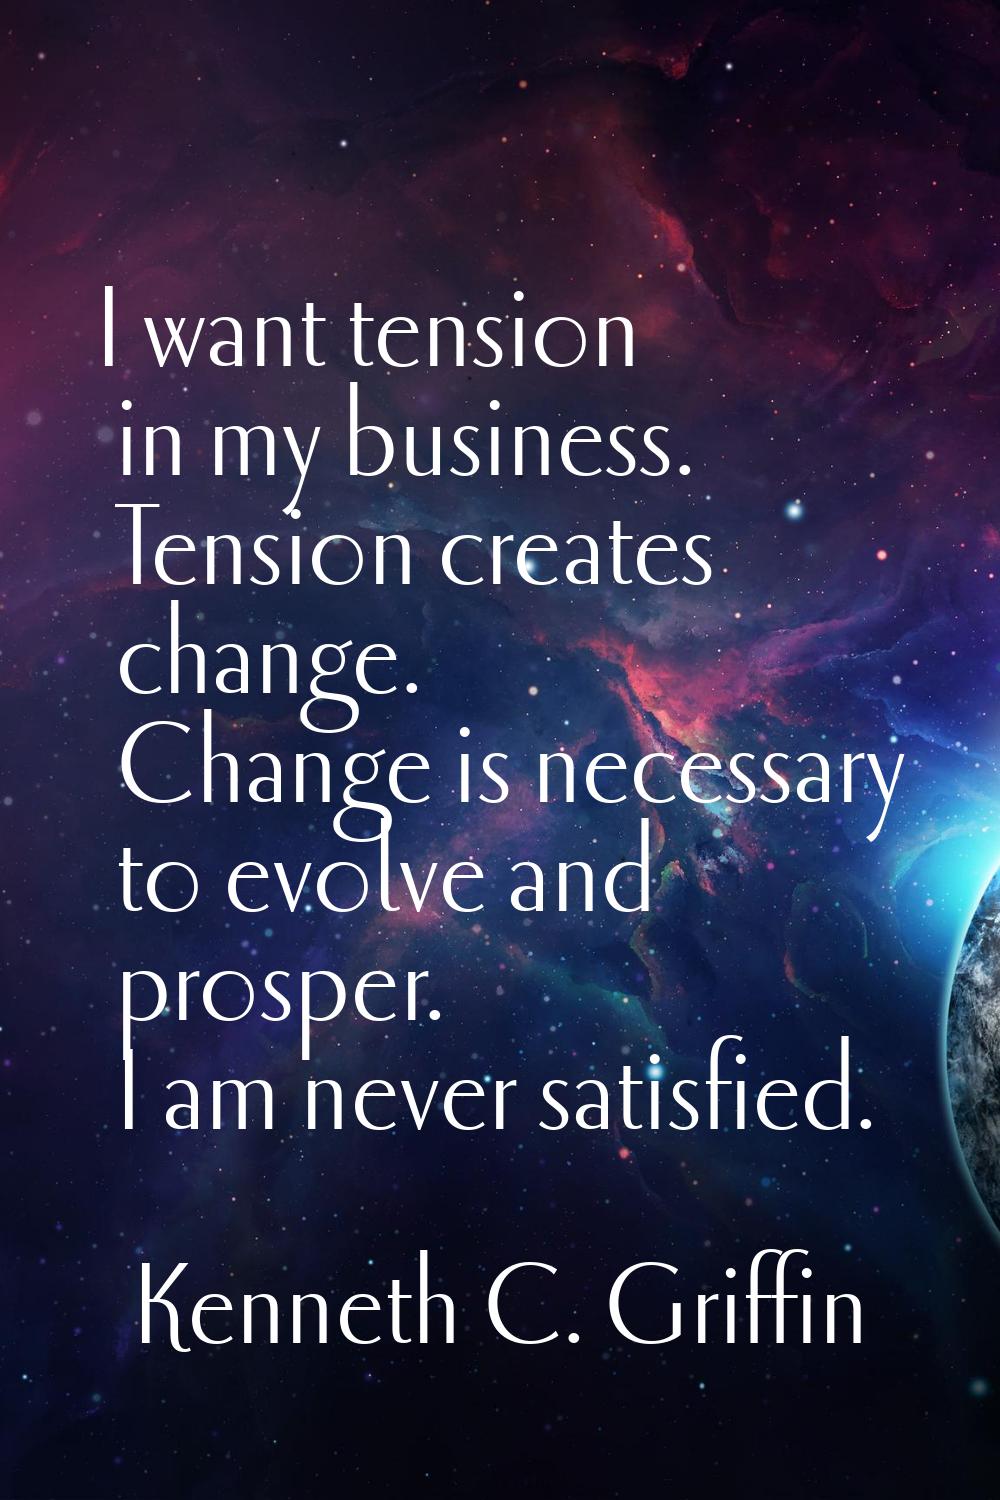 I want tension in my business. Tension creates change. Change is necessary to evolve and prosper. I